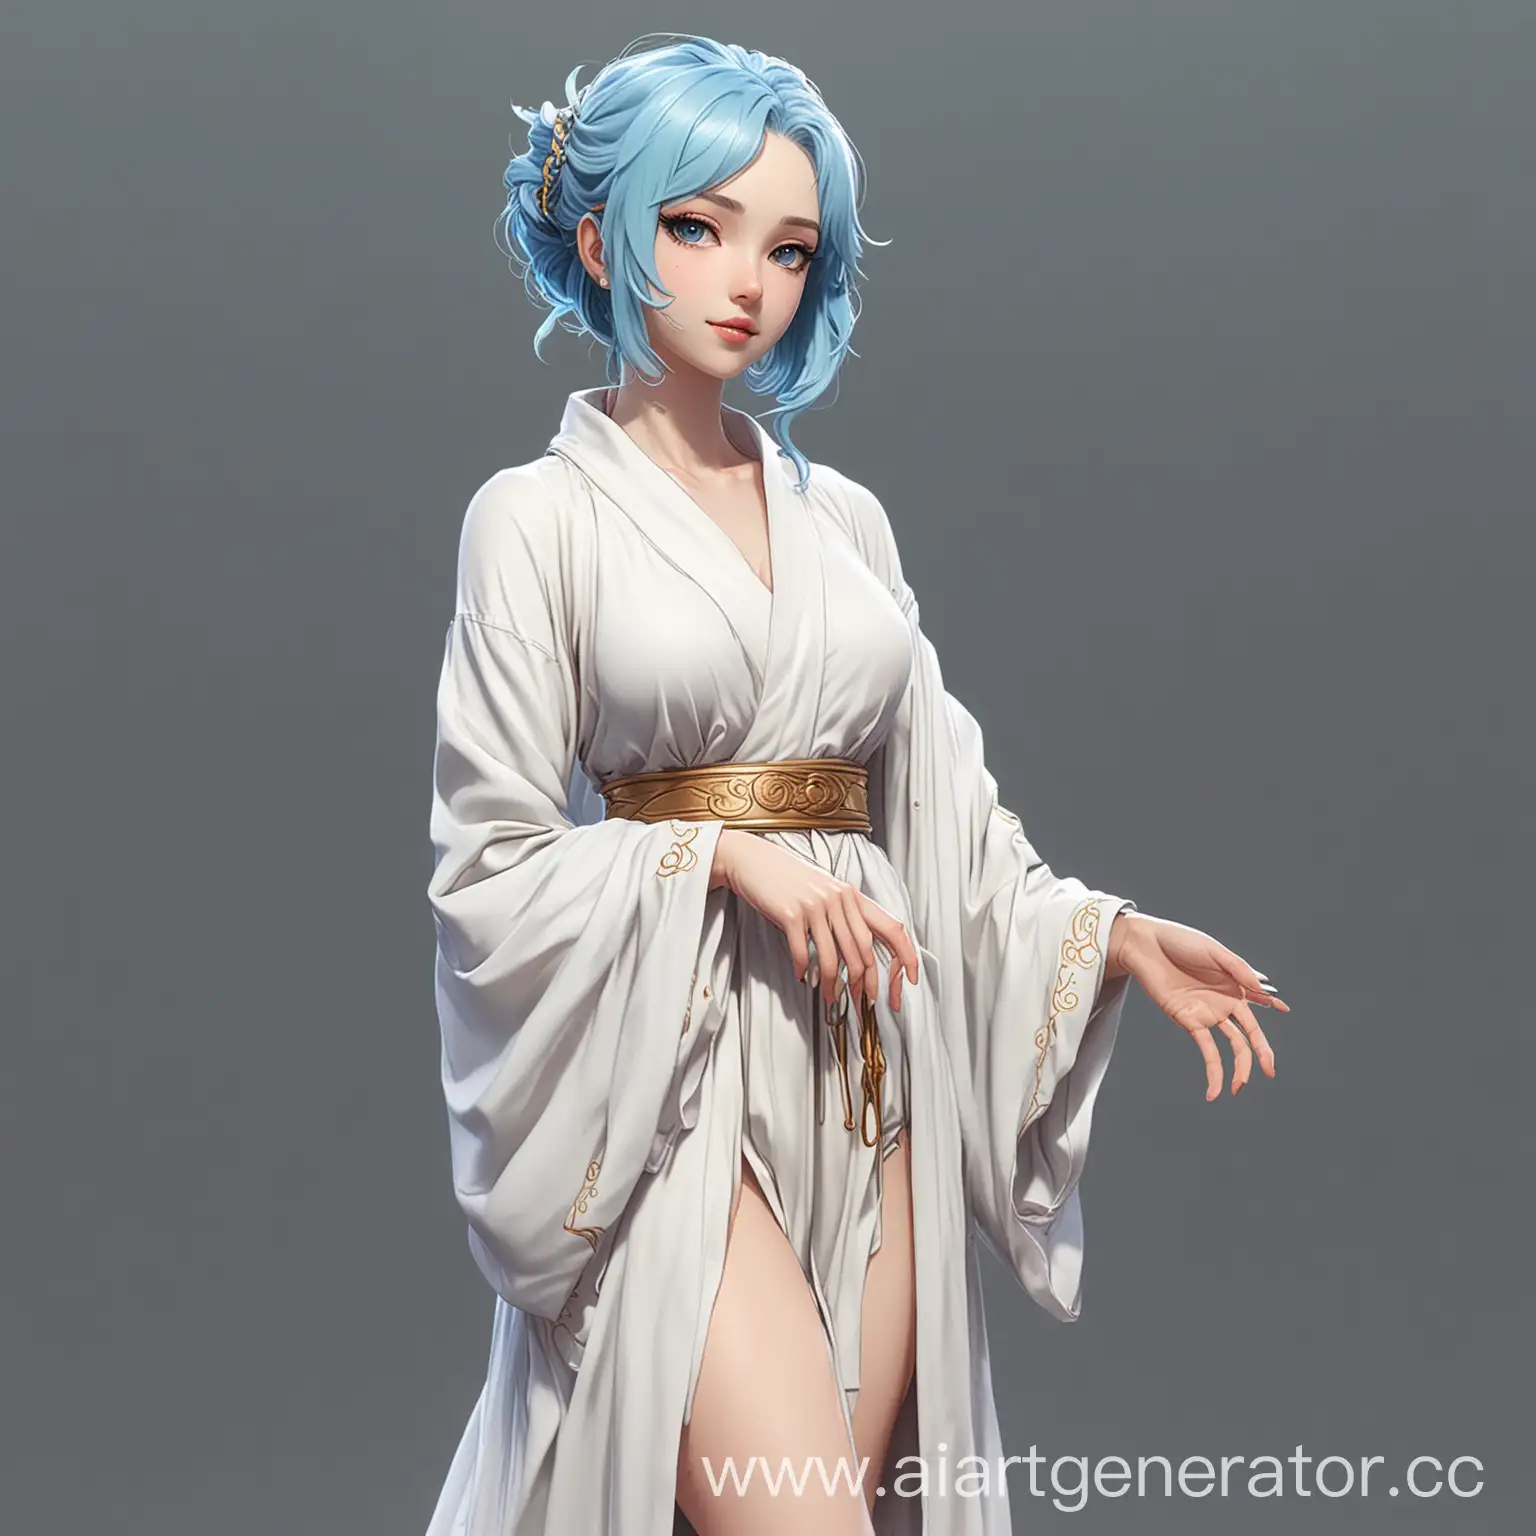 Ethereal-Anime-Goddess-Serene-Figure-in-White-Robe-with-Blue-Animated-Hair